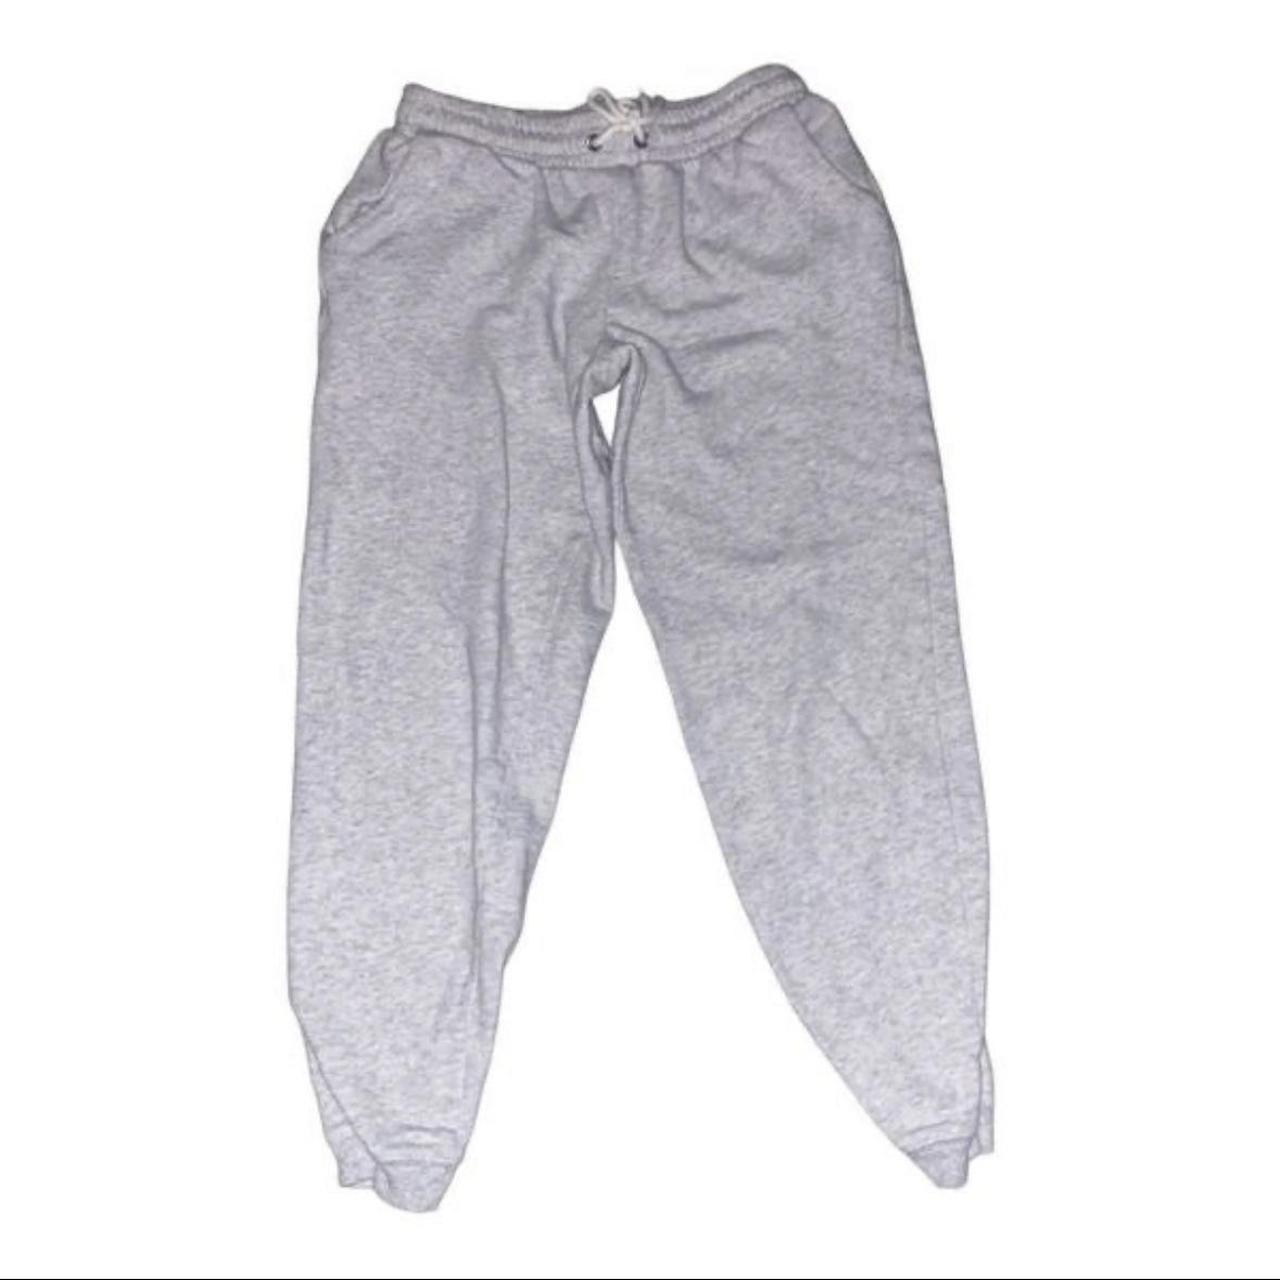 Old navy jogger sweatpants size xs but fit more like - Depop